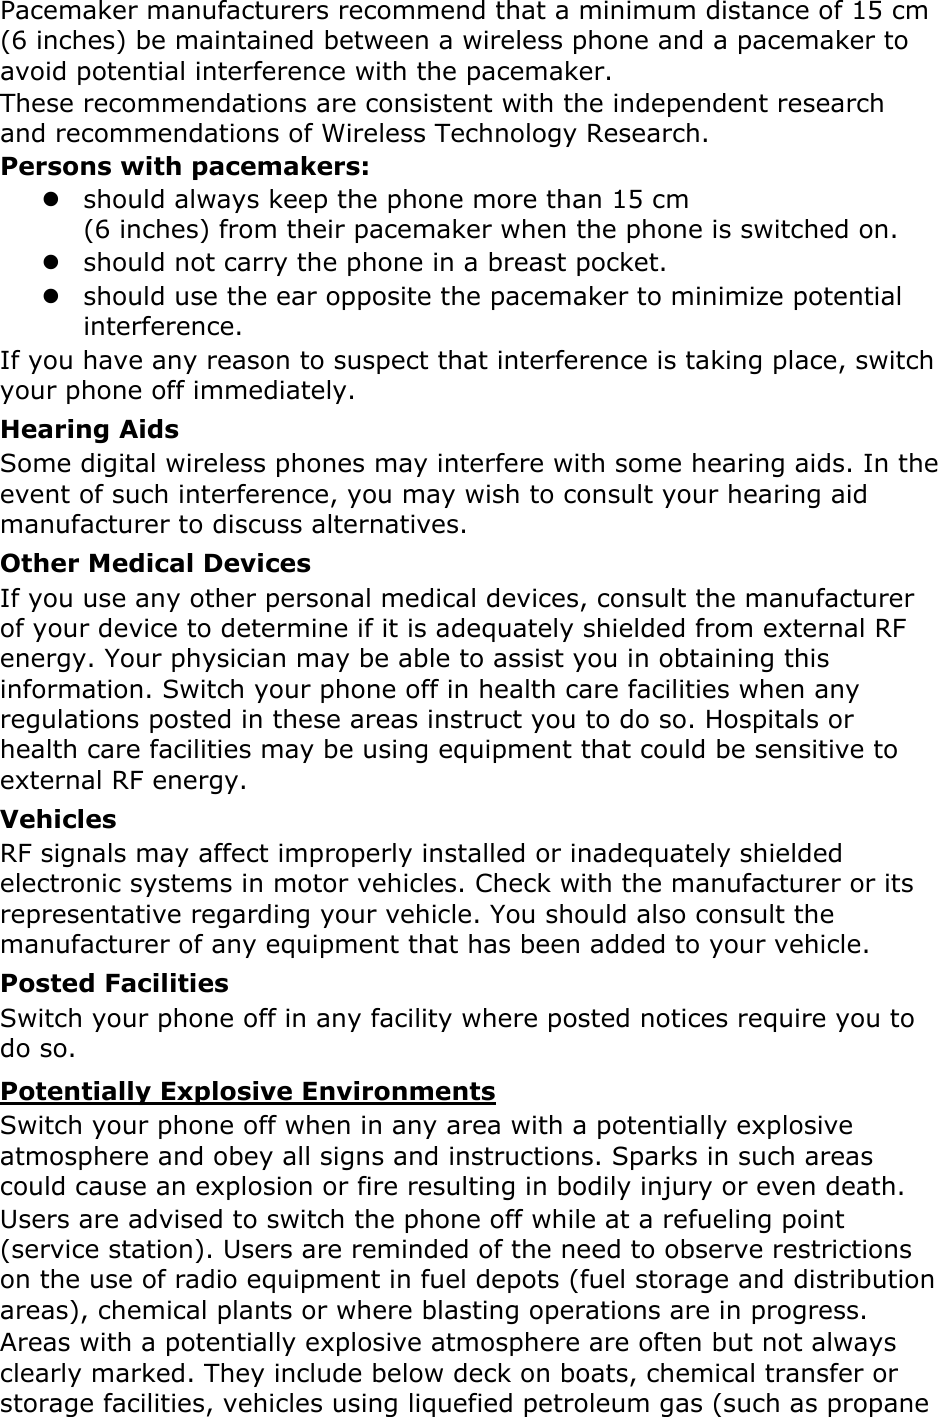 Pacemaker manufacturers recommend that a minimum distance of 15 cm (6 inches) be maintained between a wireless phone and a pacemaker to avoid potential interference with the pacemaker. These recommendations are consistent with the independent research and recommendations of Wireless Technology Research. Persons with pacemakers: z should always keep the phone more than 15 cm   (6 inches) from their pacemaker when the phone is switched on. z should not carry the phone in a breast pocket. z should use the ear opposite the pacemaker to minimize potential interference. If you have any reason to suspect that interference is taking place, switch your phone off immediately. Hearing Aids Some digital wireless phones may interfere with some hearing aids. In the event of such interference, you may wish to consult your hearing aid manufacturer to discuss alternatives. Other Medical Devices If you use any other personal medical devices, consult the manufacturer of your device to determine if it is adequately shielded from external RF energy. Your physician may be able to assist you in obtaining this information. Switch your phone off in health care facilities when any regulations posted in these areas instruct you to do so. Hospitals or health care facilities may be using equipment that could be sensitive to external RF energy. Vehicles RF signals may affect improperly installed or inadequately shielded electronic systems in motor vehicles. Check with the manufacturer or its representative regarding your vehicle. You should also consult the manufacturer of any equipment that has been added to your vehicle. Posted Facilities Switch your phone off in any facility where posted notices require you to do so. Potentially Explosive Environments Switch your phone off when in any area with a potentially explosive atmosphere and obey all signs and instructions. Sparks in such areas could cause an explosion or fire resulting in bodily injury or even death. Users are advised to switch the phone off while at a refueling point (service station). Users are reminded of the need to observe restrictions on the use of radio equipment in fuel depots (fuel storage and distribution areas), chemical plants or where blasting operations are in progress. Areas with a potentially explosive atmosphere are often but not always clearly marked. They include below deck on boats, chemical transfer or storage facilities, vehicles using liquefied petroleum gas (such as propane 